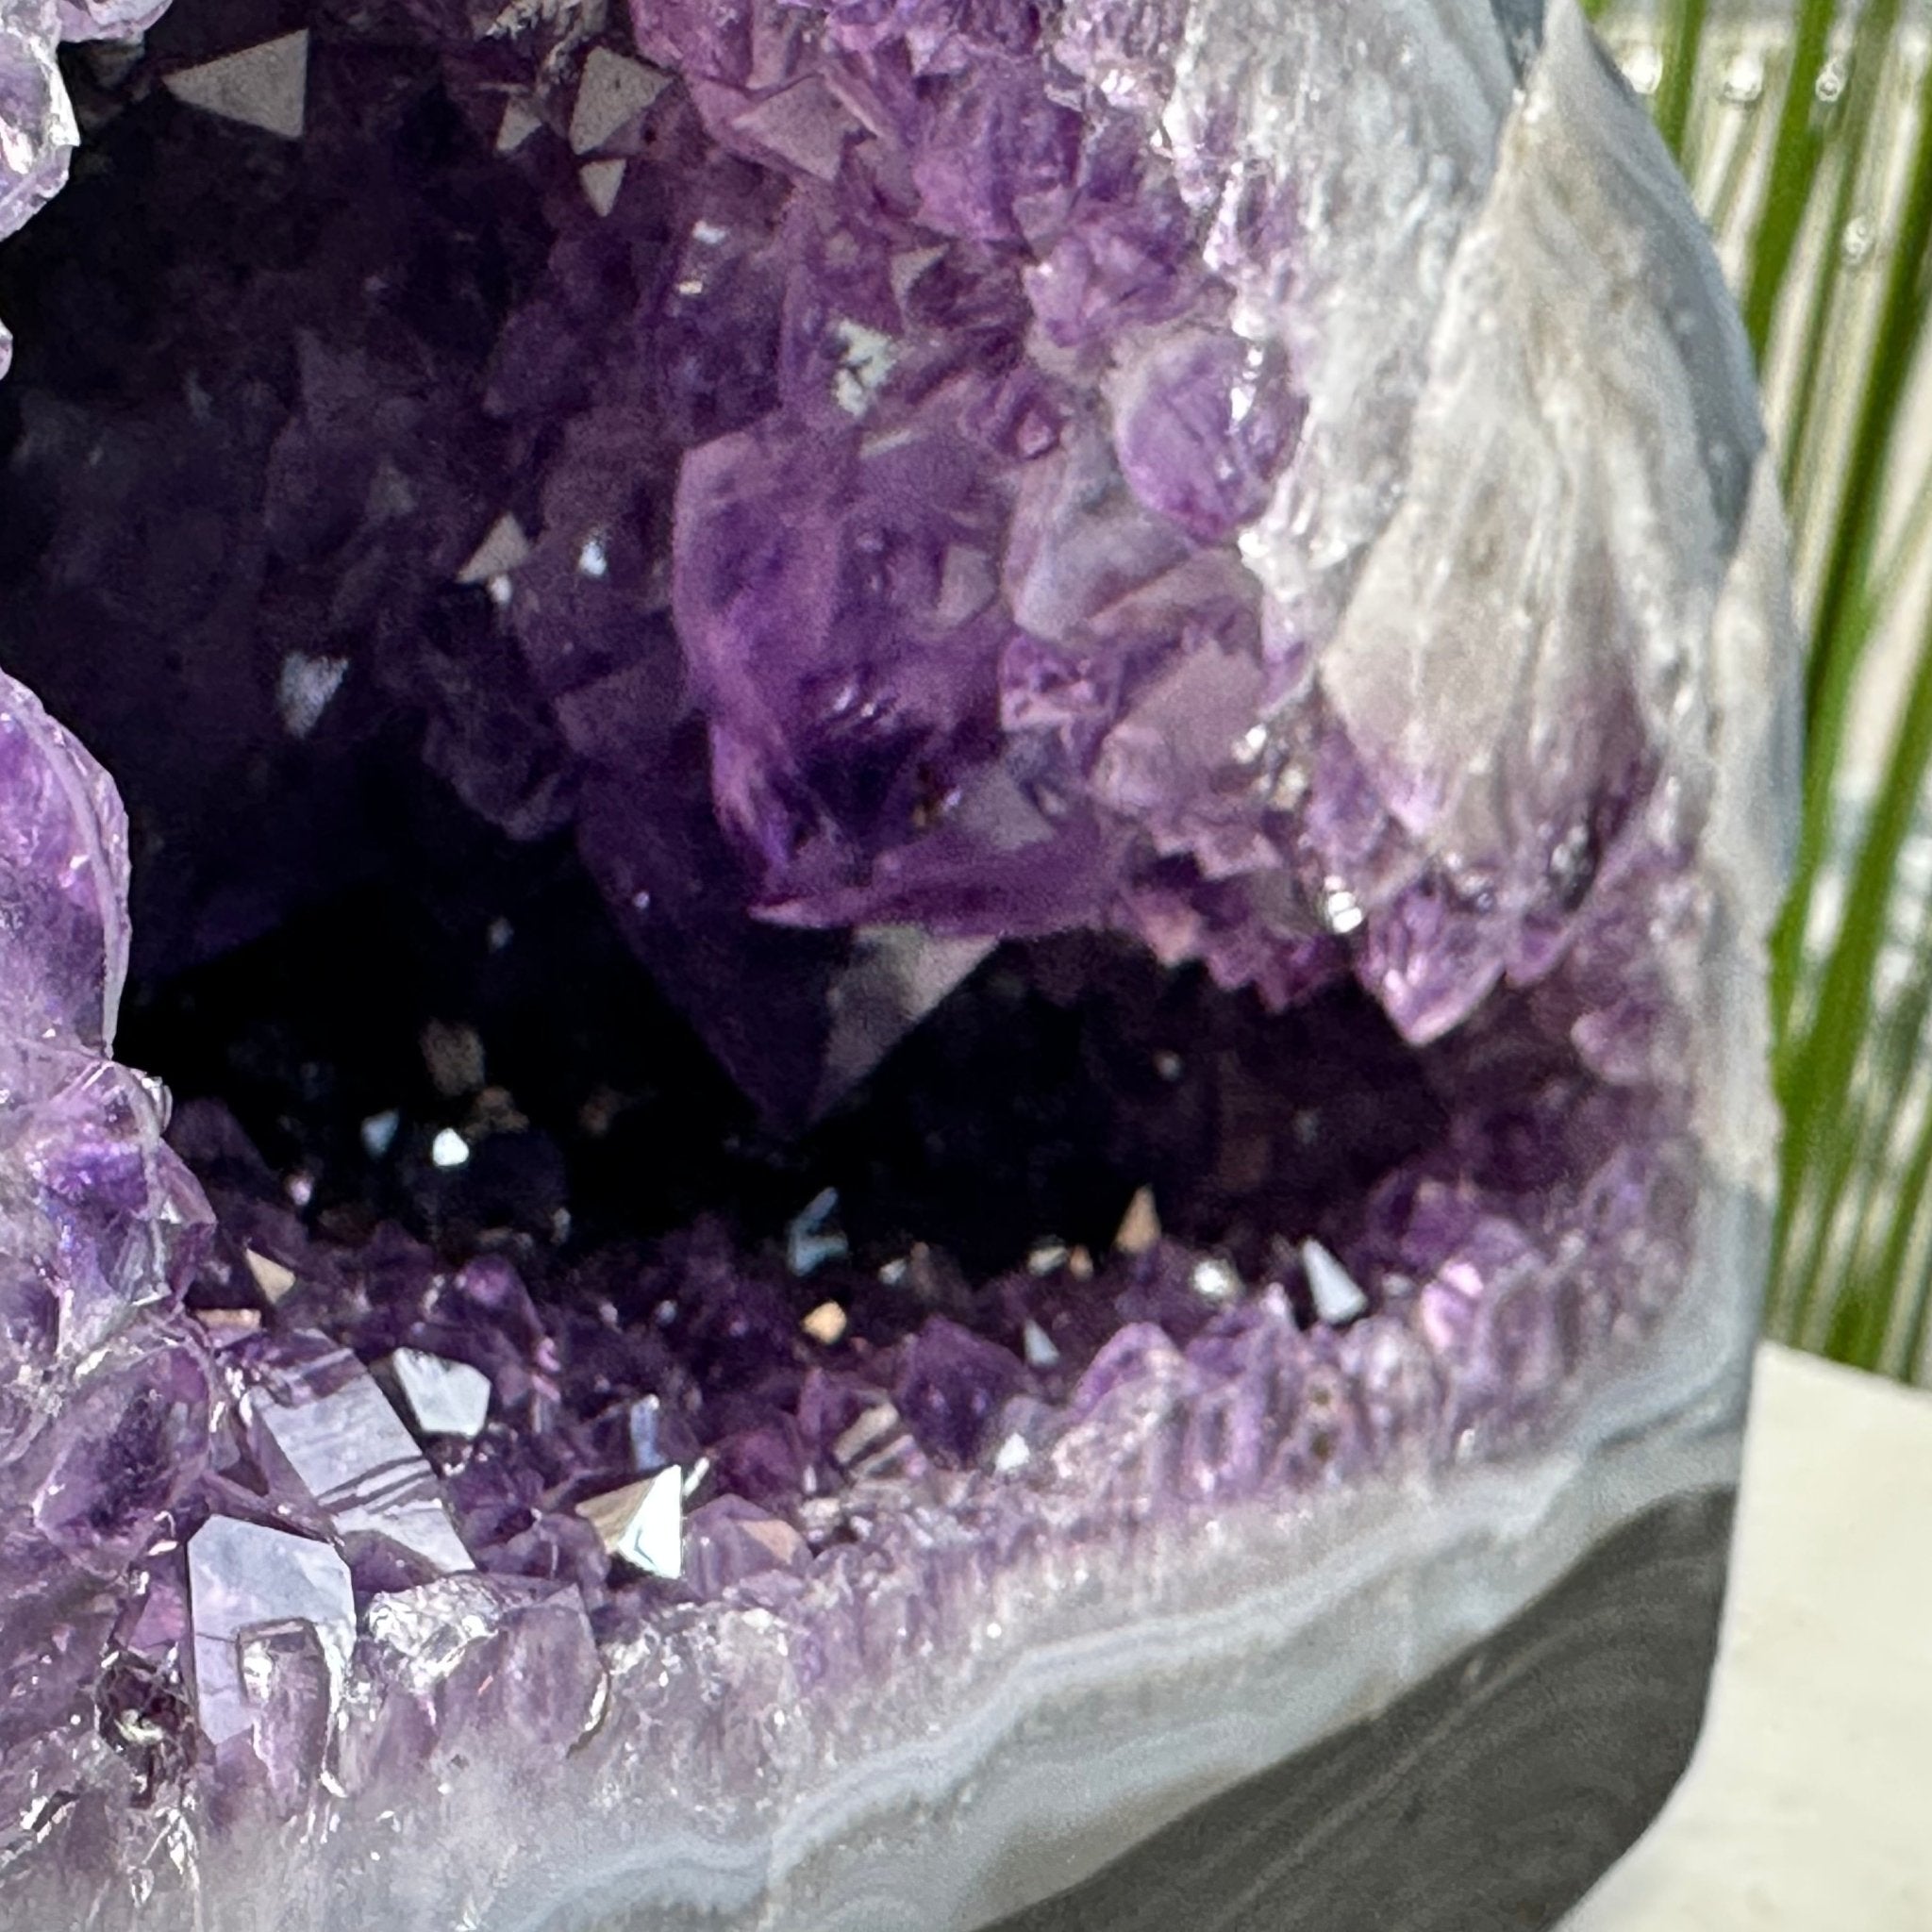 Extra Plus Quality Brazilian Amethyst Cathedral, 8.1 lbs & 4.75" Tall, Model #5601-1051 by Brazil Gems - Brazil GemsBrazil GemsExtra Plus Quality Brazilian Amethyst Cathedral, 8.1 lbs & 4.75" Tall, Model #5601-1051 by Brazil GemsCathedrals5601-1051